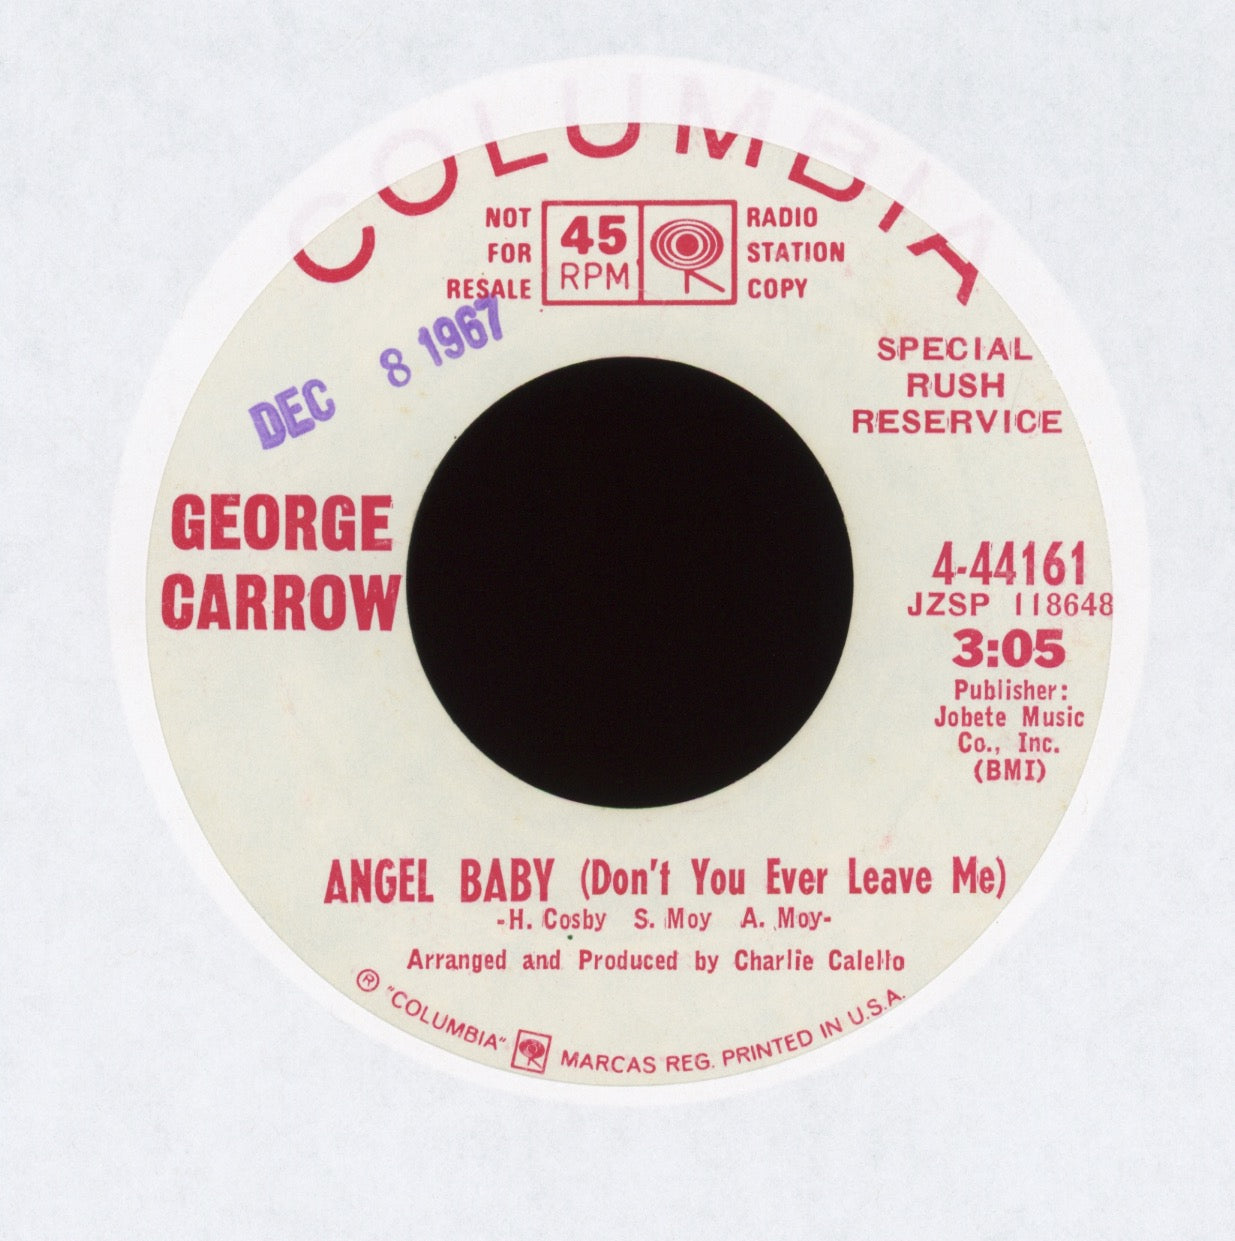 George Carrow - Angel Baby (Don't You Ever Leave Me) on Columbia Promo Northern Soul 45